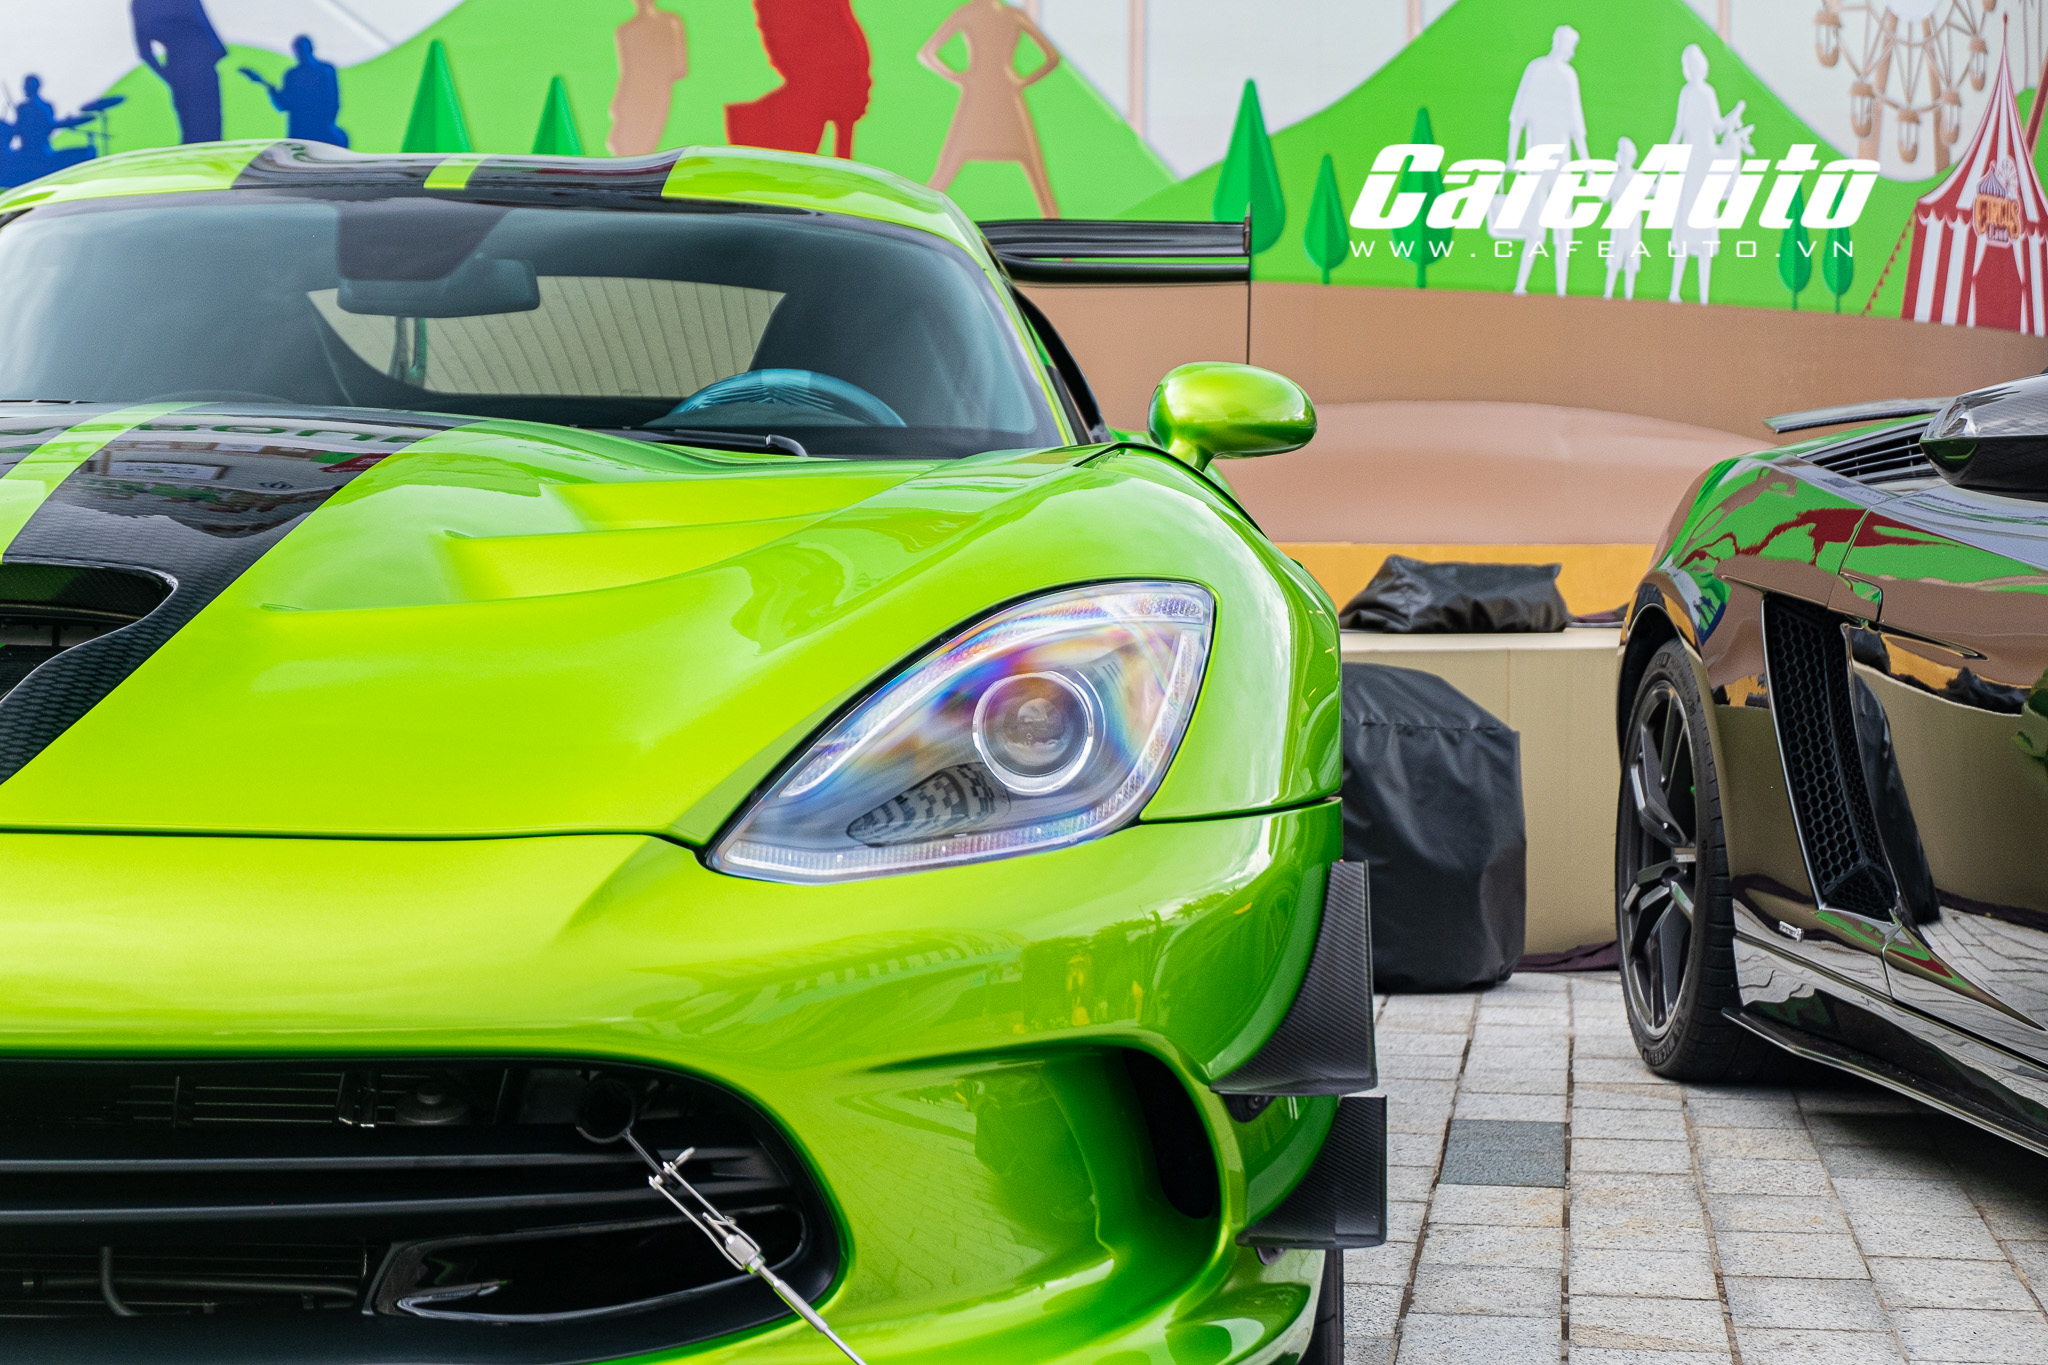 dodge-viper-acr-the-he-moi-doc-nhat-cafeautovn-4